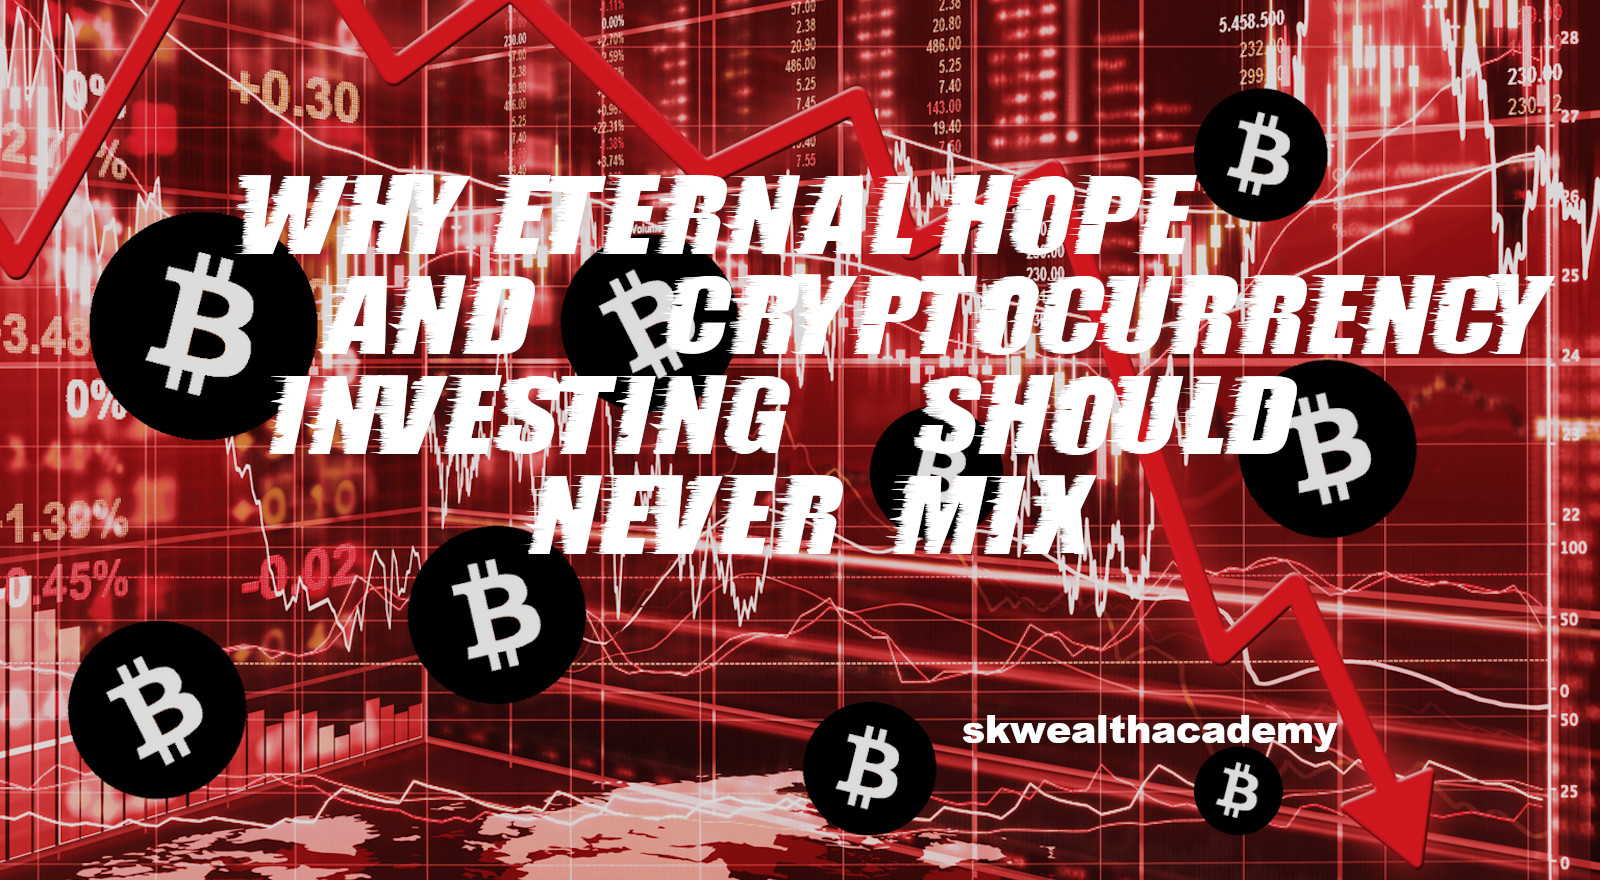 hope and cryptocurrency investing should never intersect